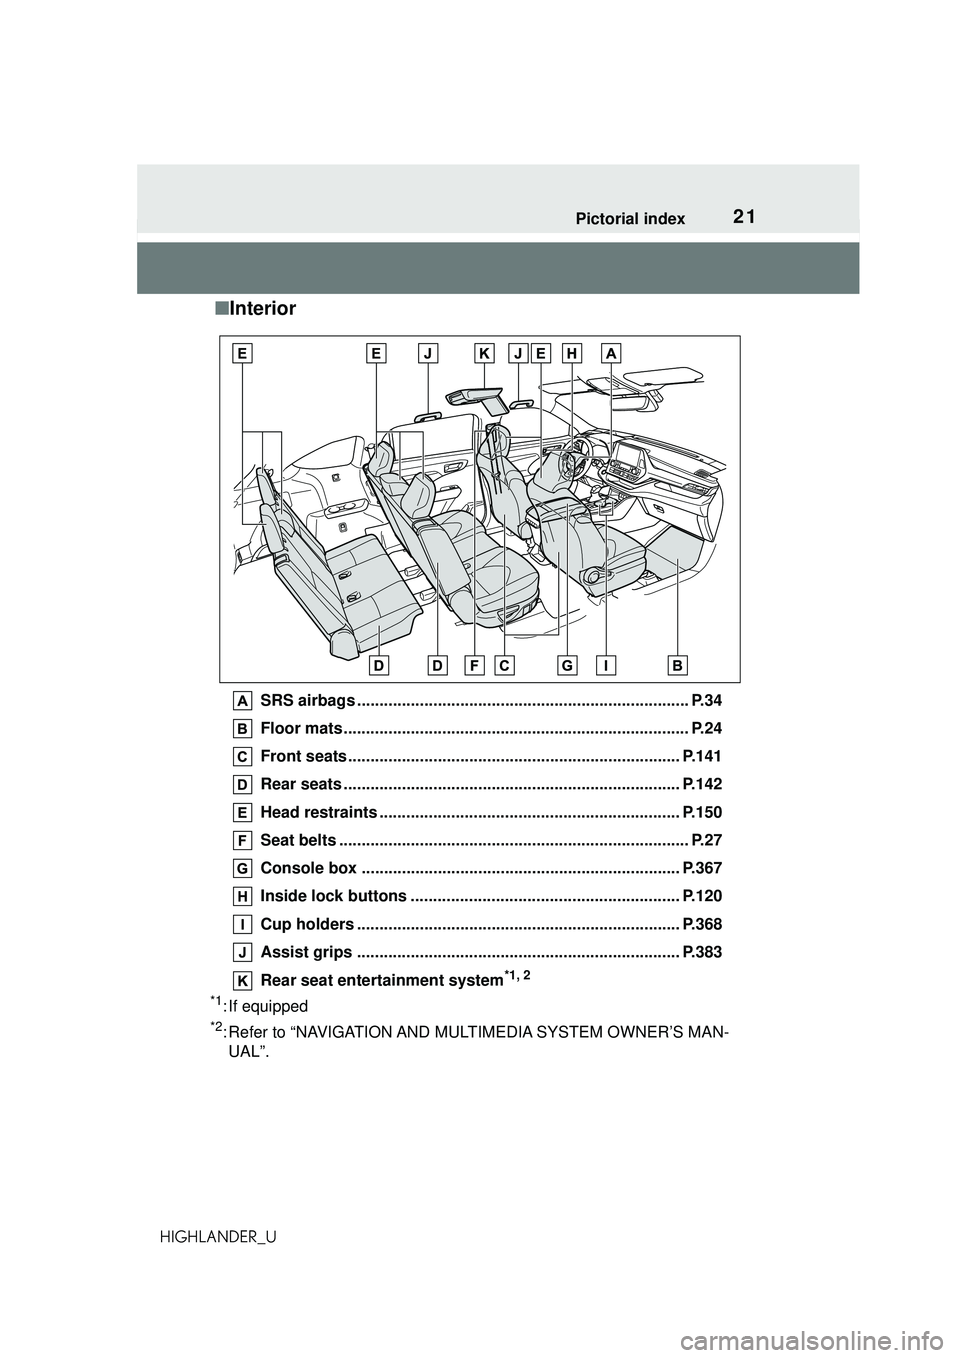 TOYOTA HIGHLANDER 2021  Owners Manual (in English) 21Pictorial index
HIGHLANDER_U
■Interior
SRS airbags .......................................................................... P.34
Floor mats.......................................................